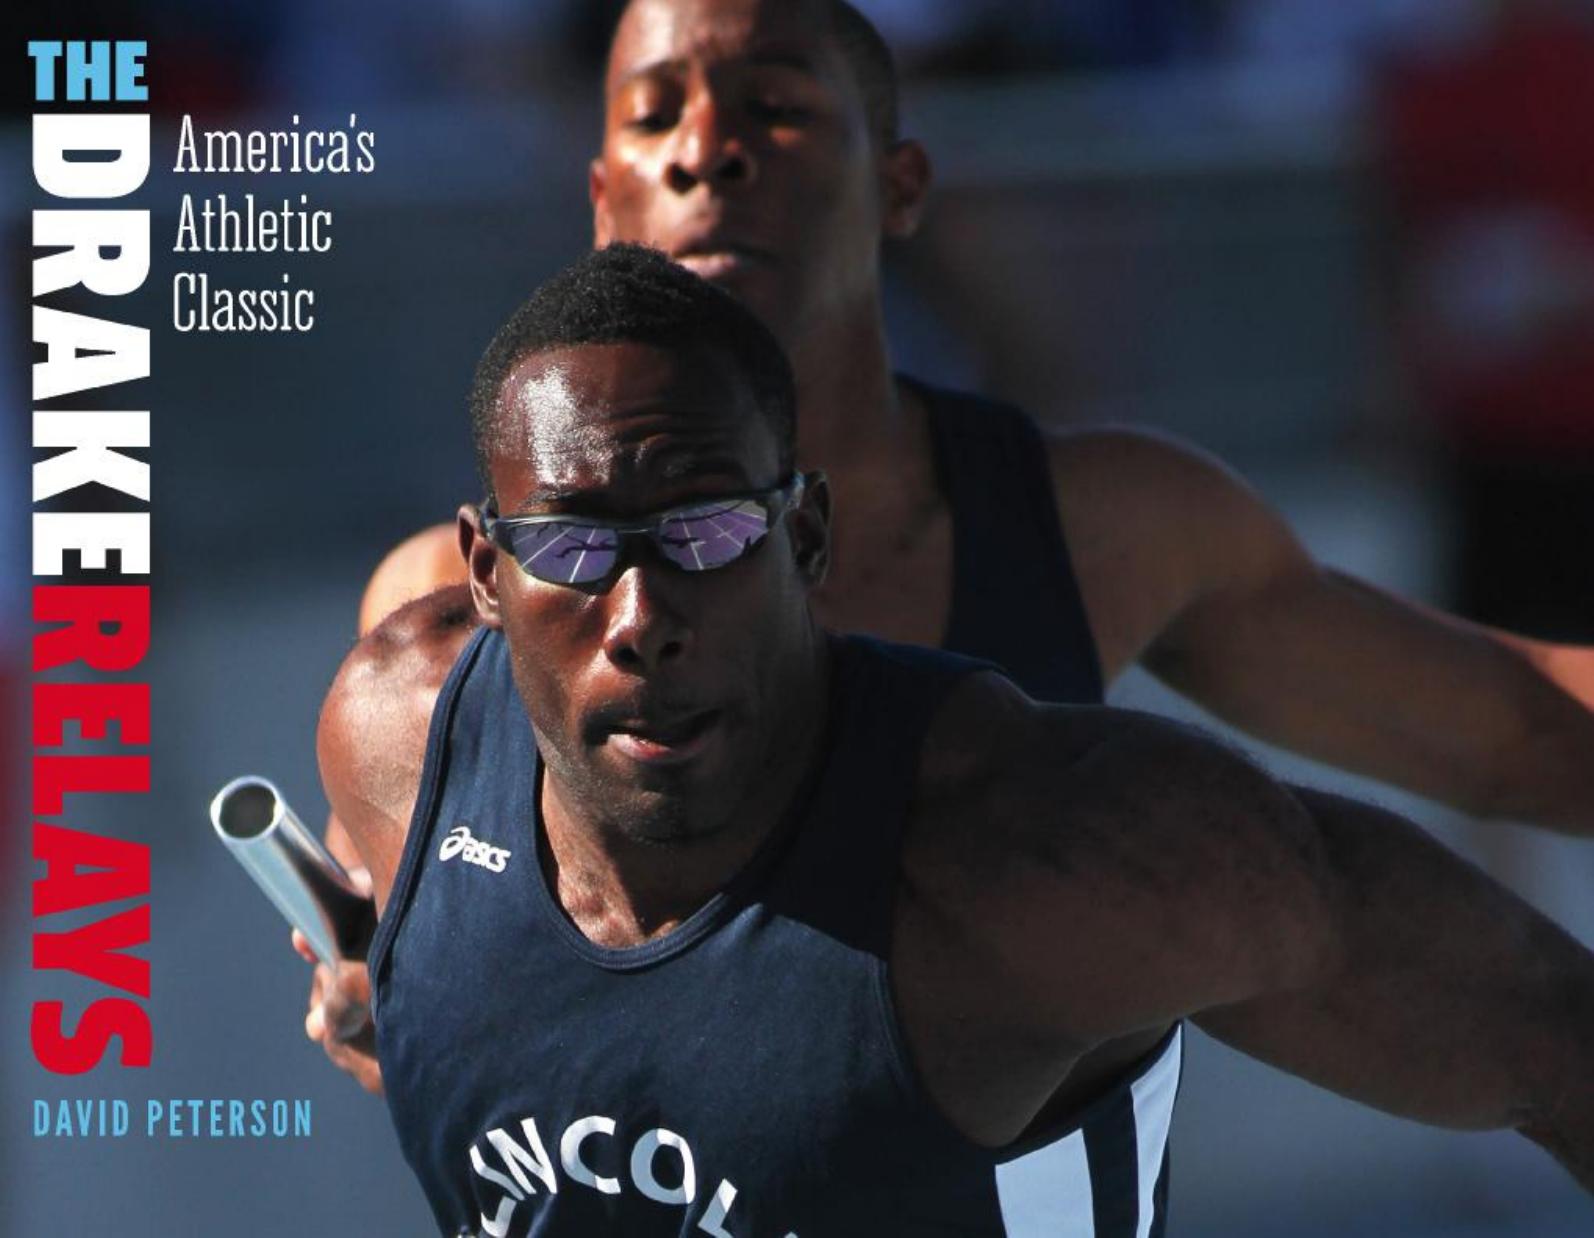 The Drake Relays : America's Athletic Classic by David Peterson